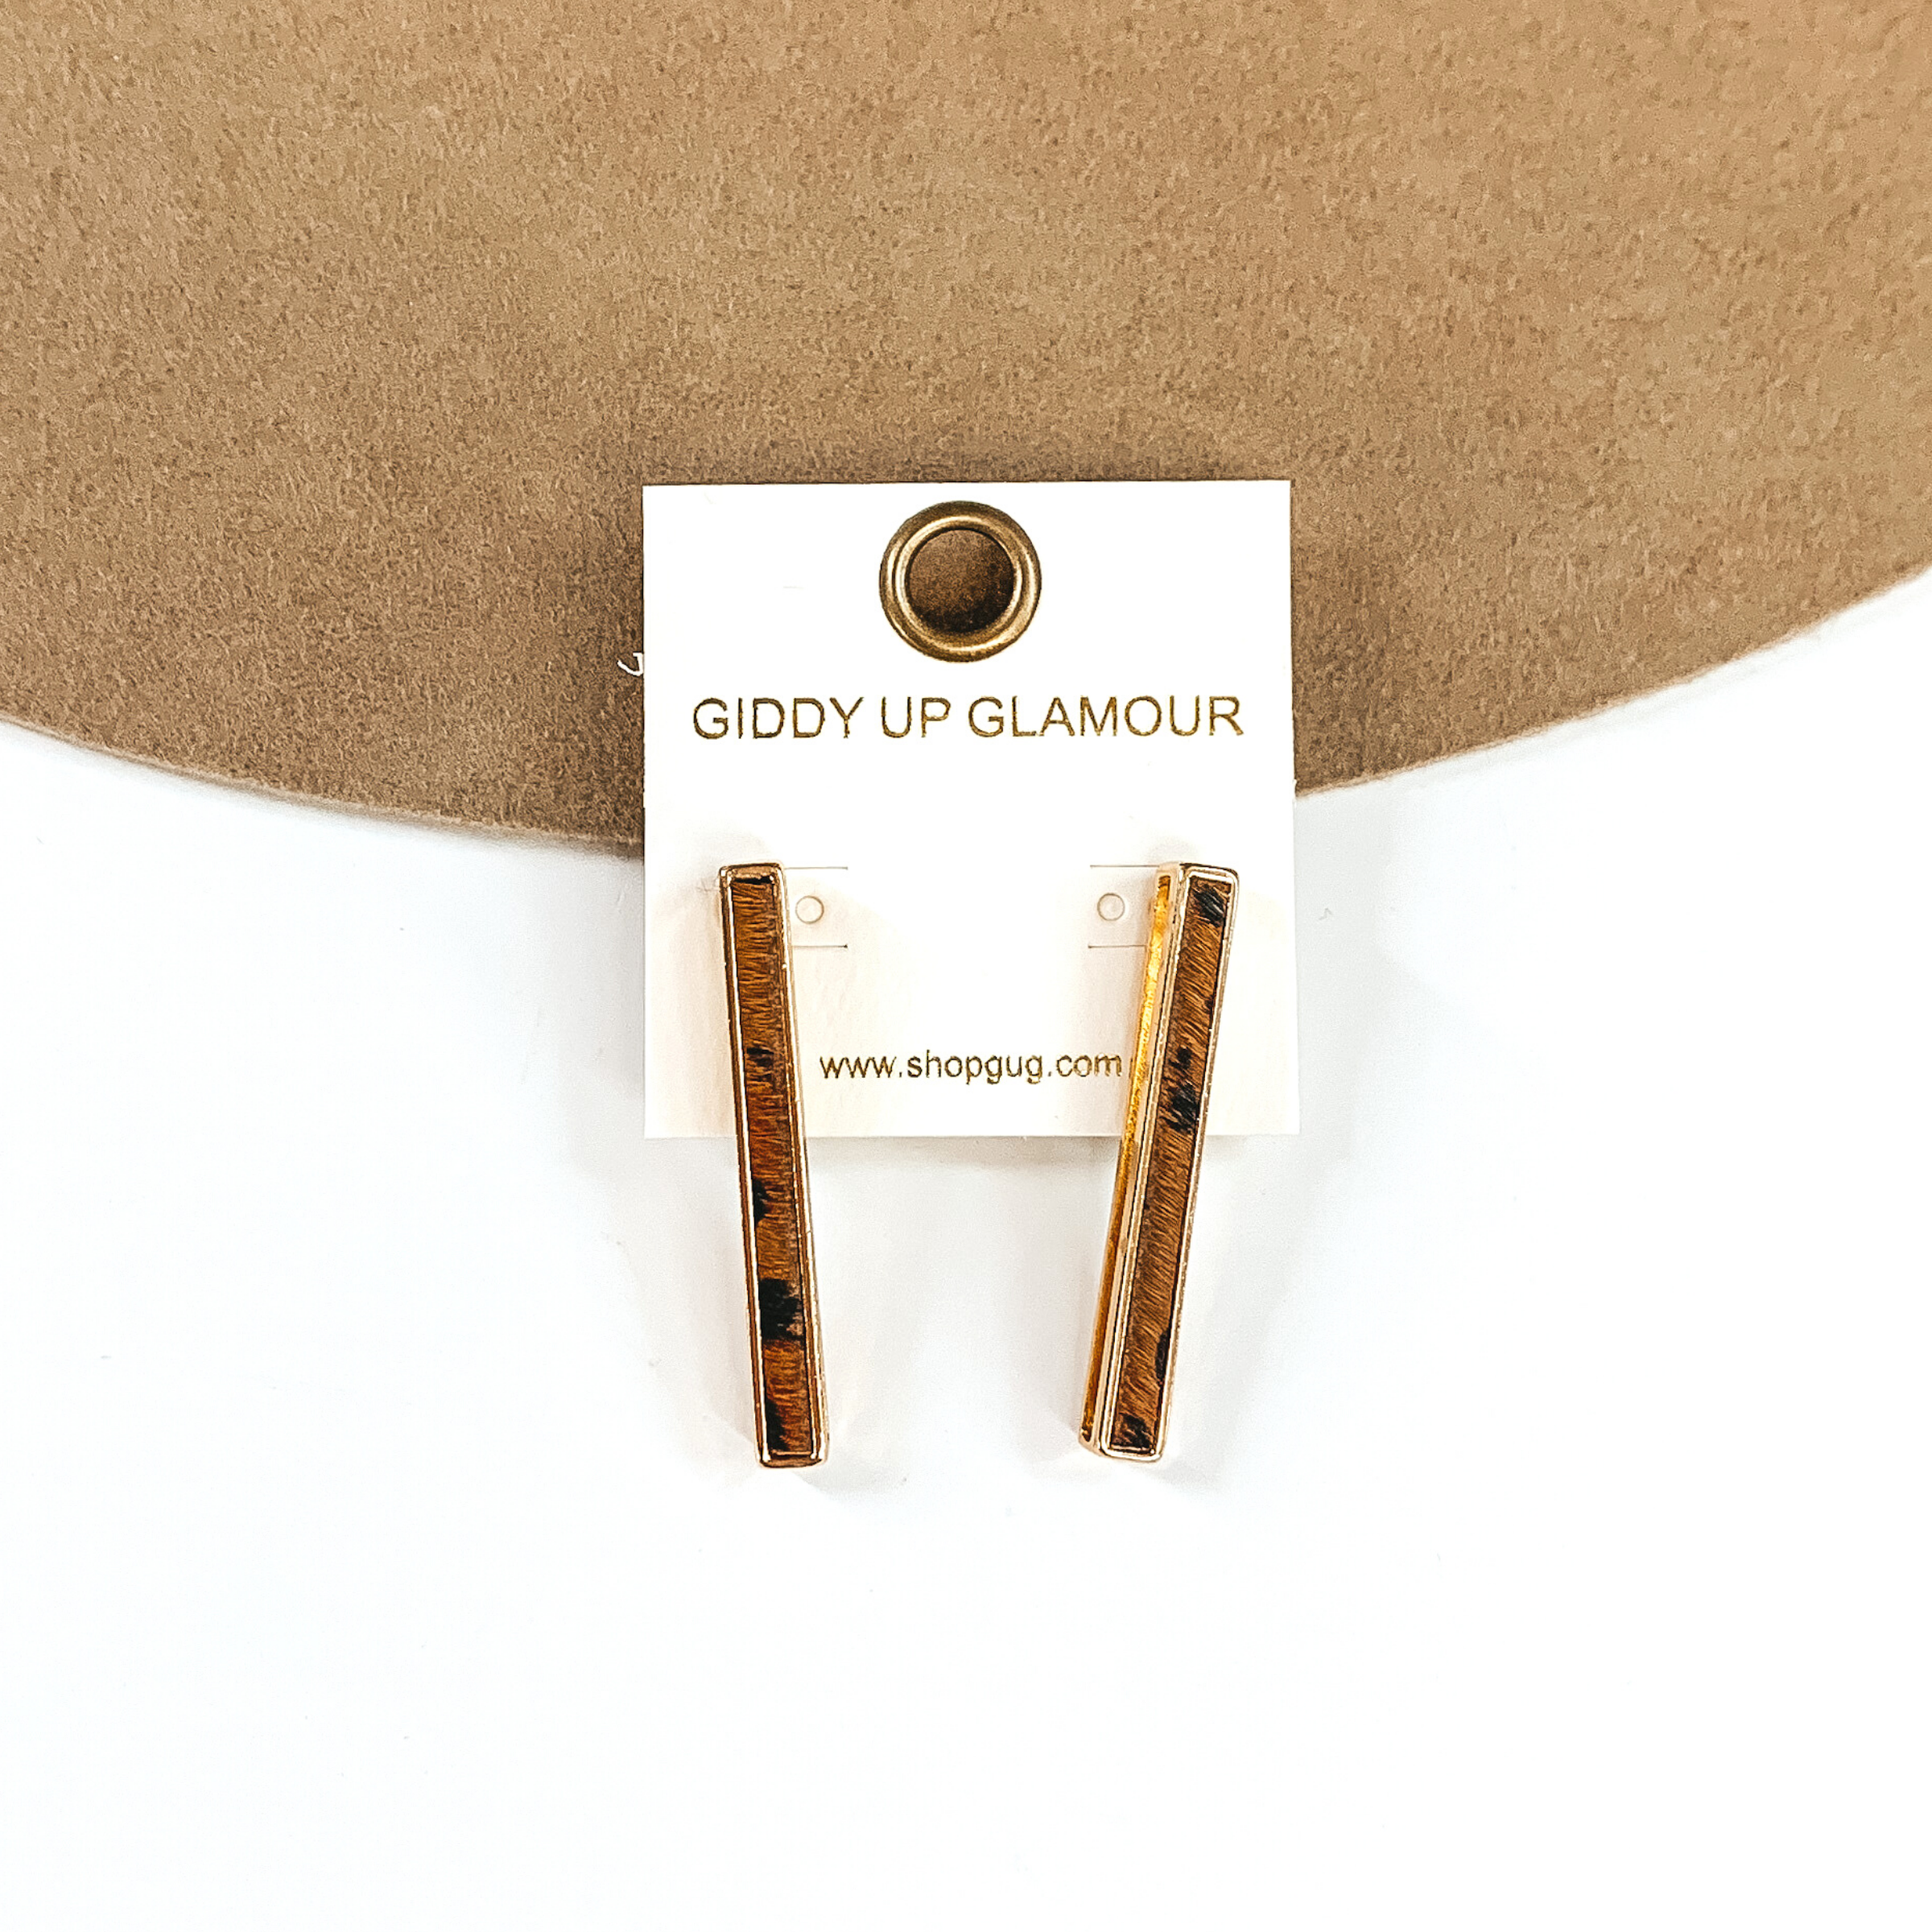 Gold rectangle bar earrings with a brown animal print inlay on a white earrings holder. These earrings are pictured on a white and tan background.